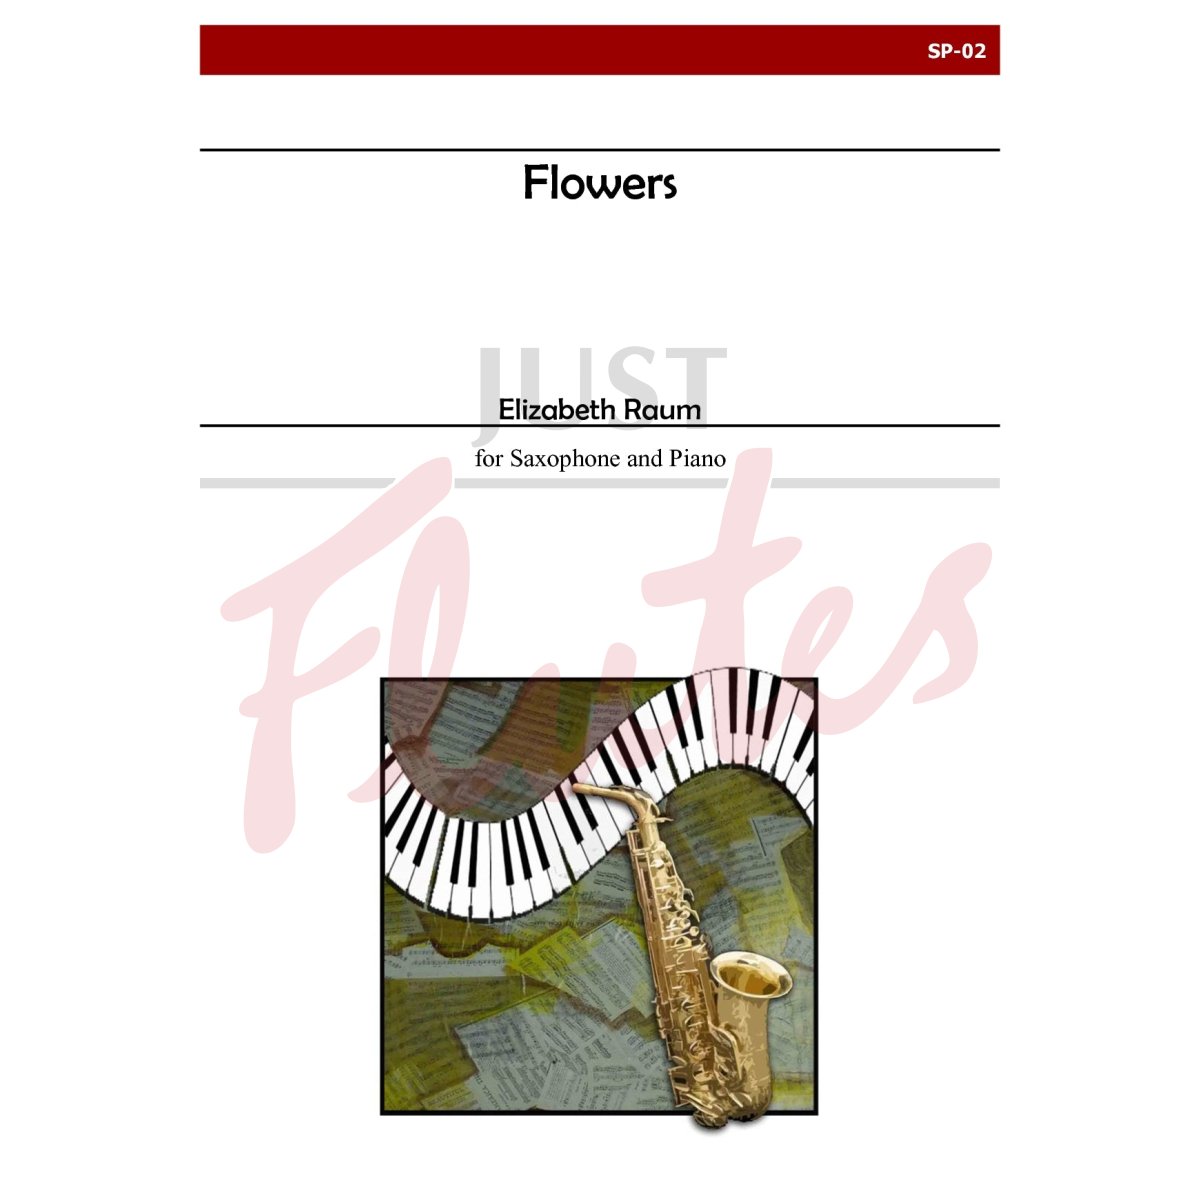 Flowers for Saxophone and Piano